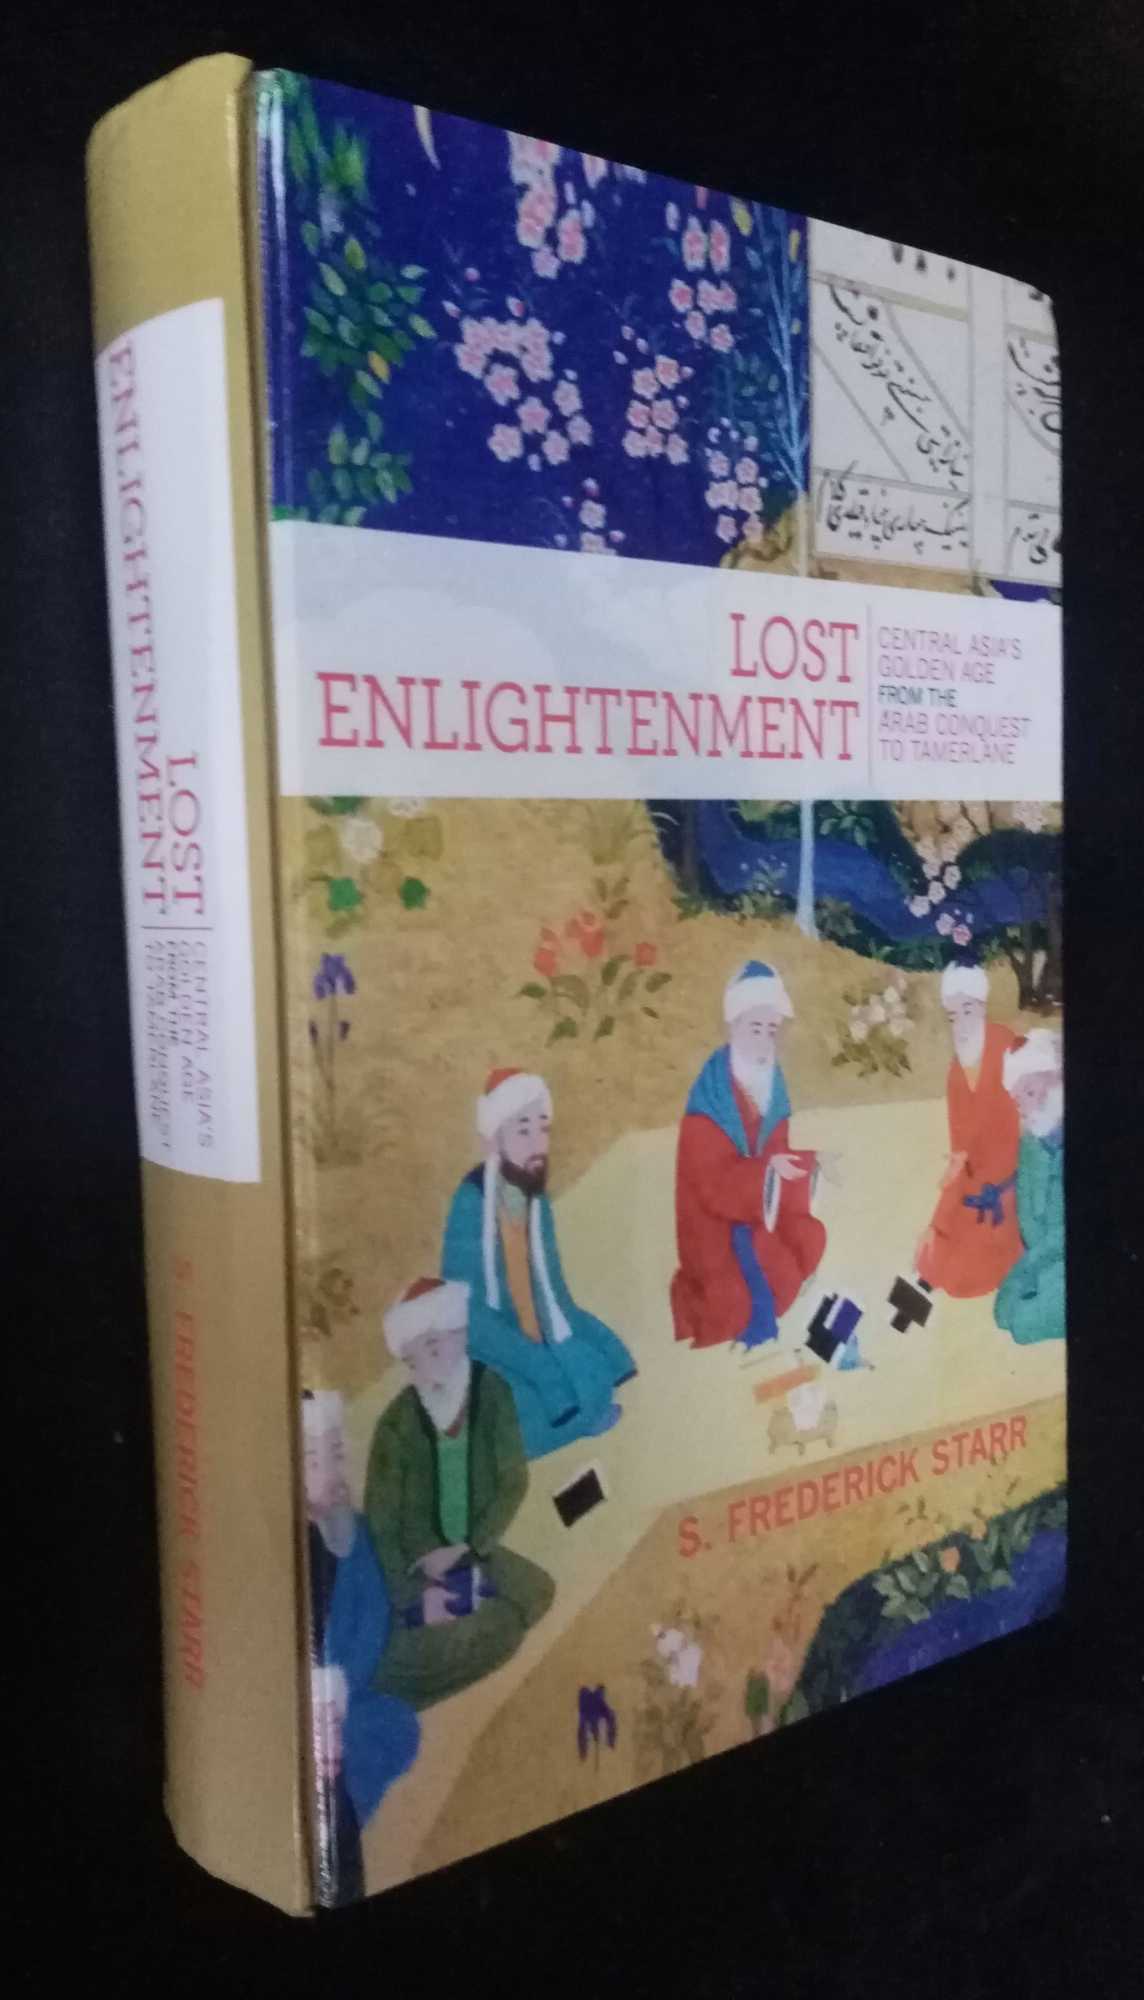 S Frederick Starr - Lost Enlightenment  Central Asia`s Golden Age from the Arab Conquest to Tamerlane